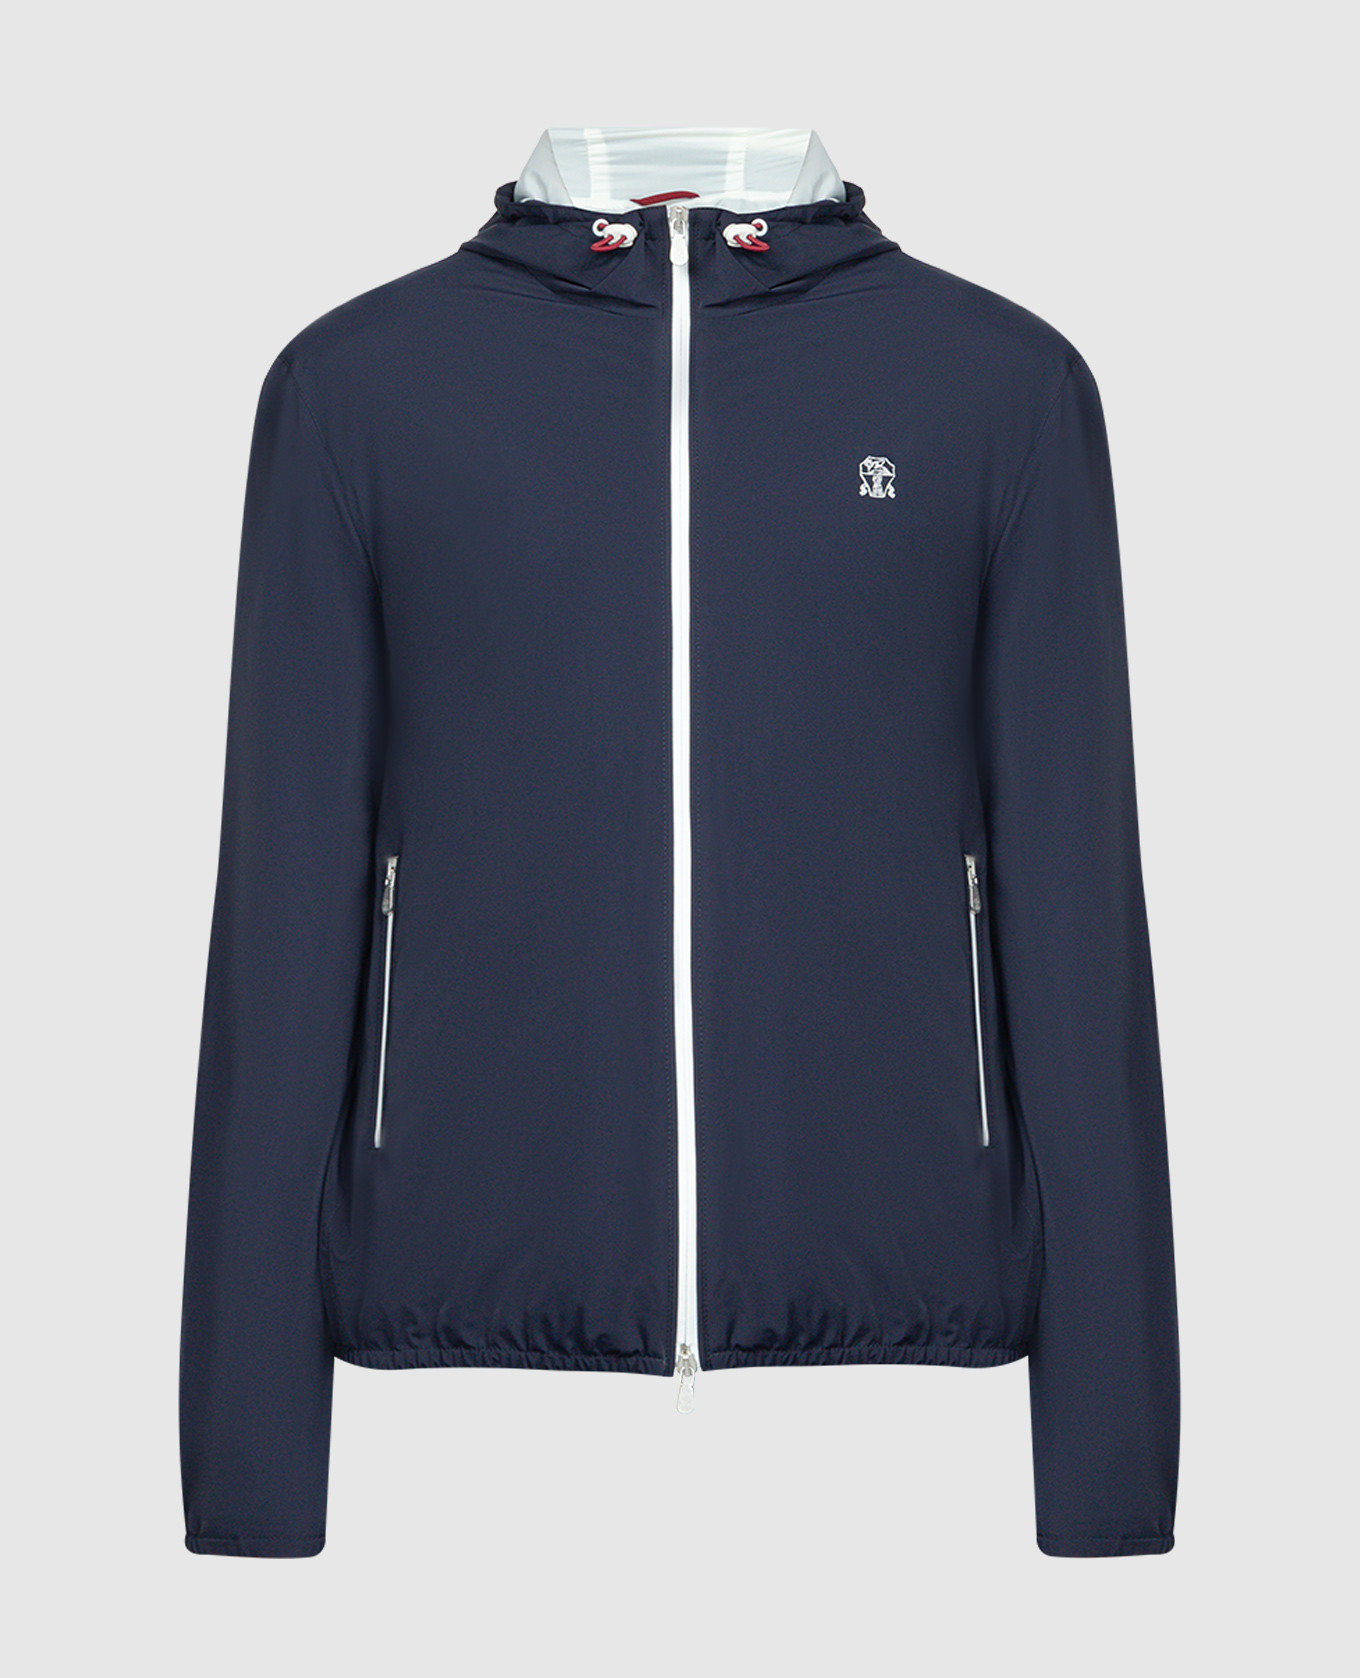 Blue windbreaker with logo embroidery